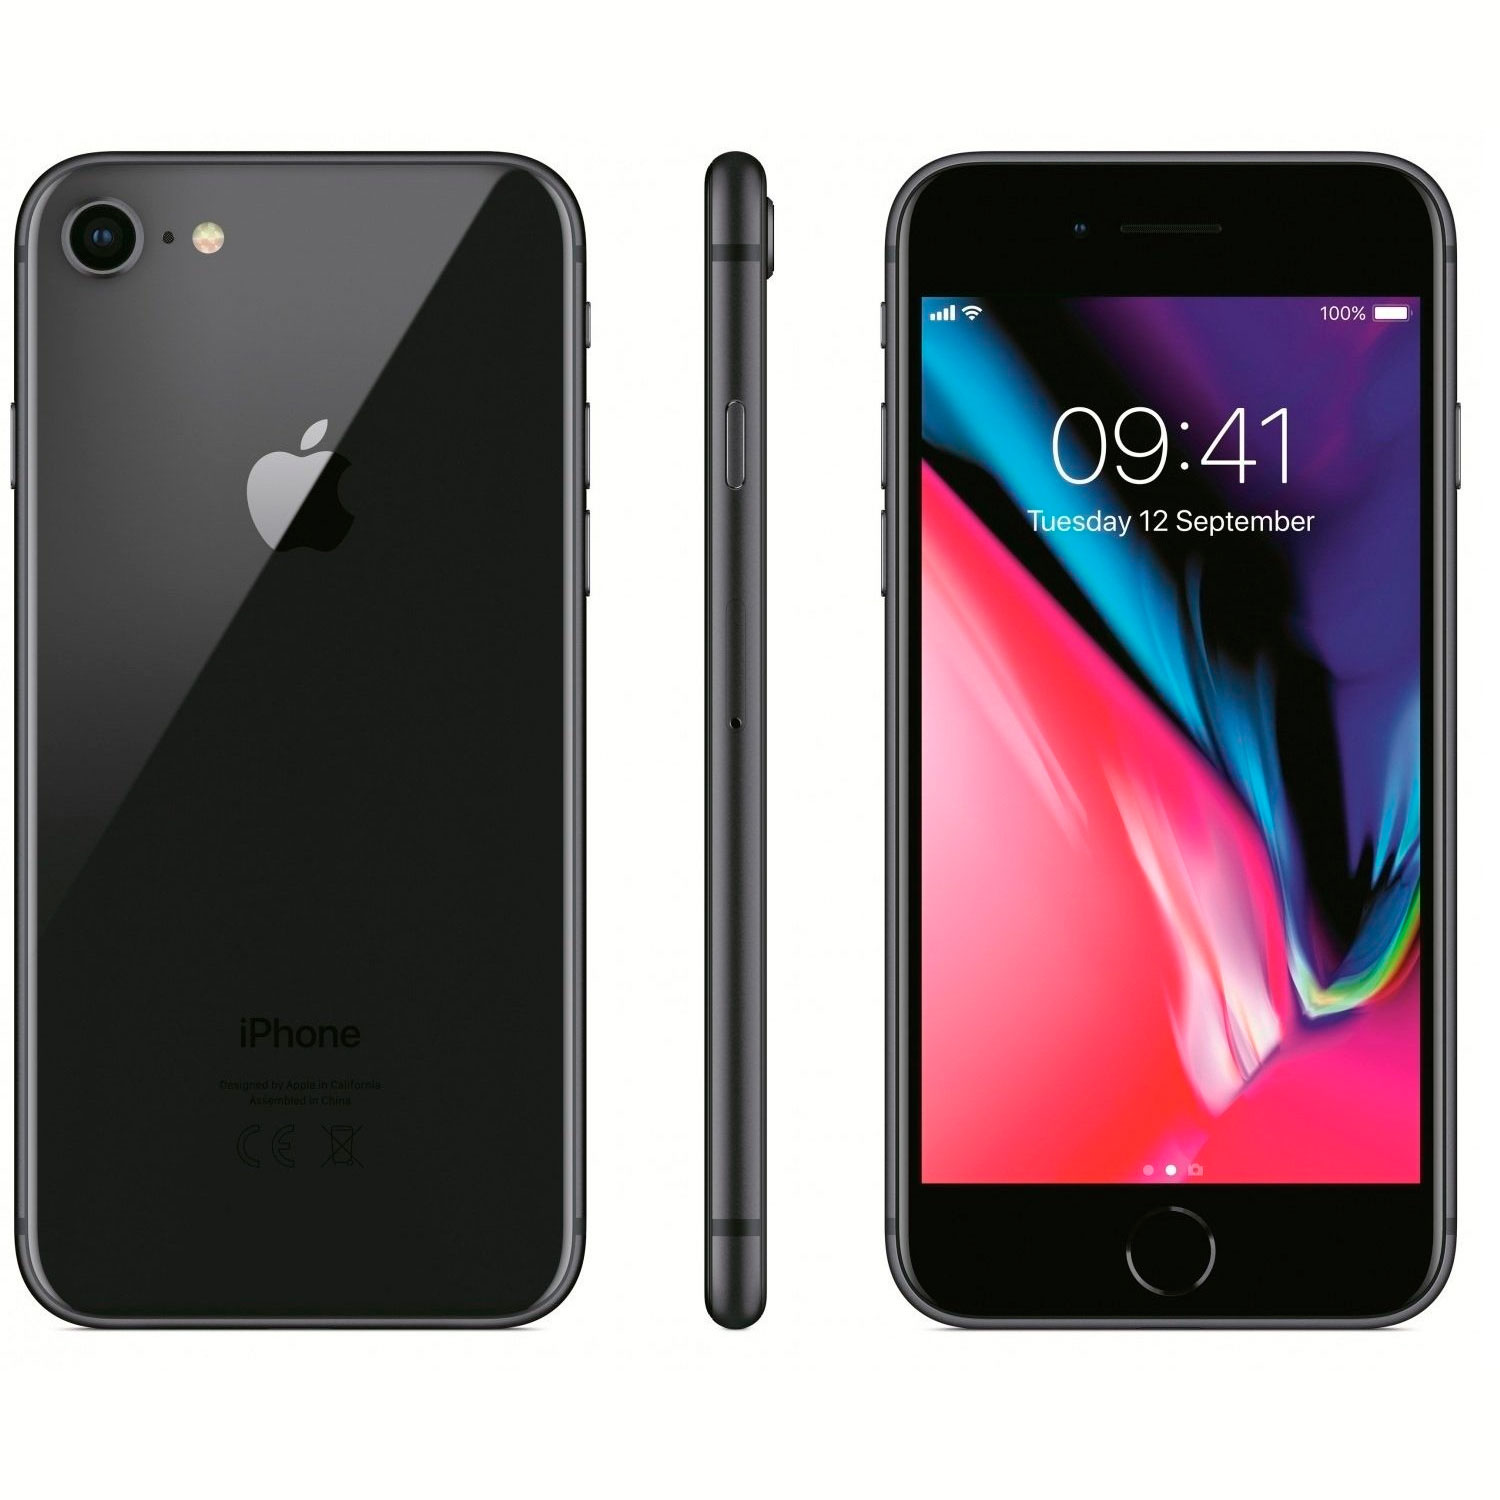 iPhone 8-64GB Space Grey Pre-Owned for sale in Cork, Ireland - Mobile